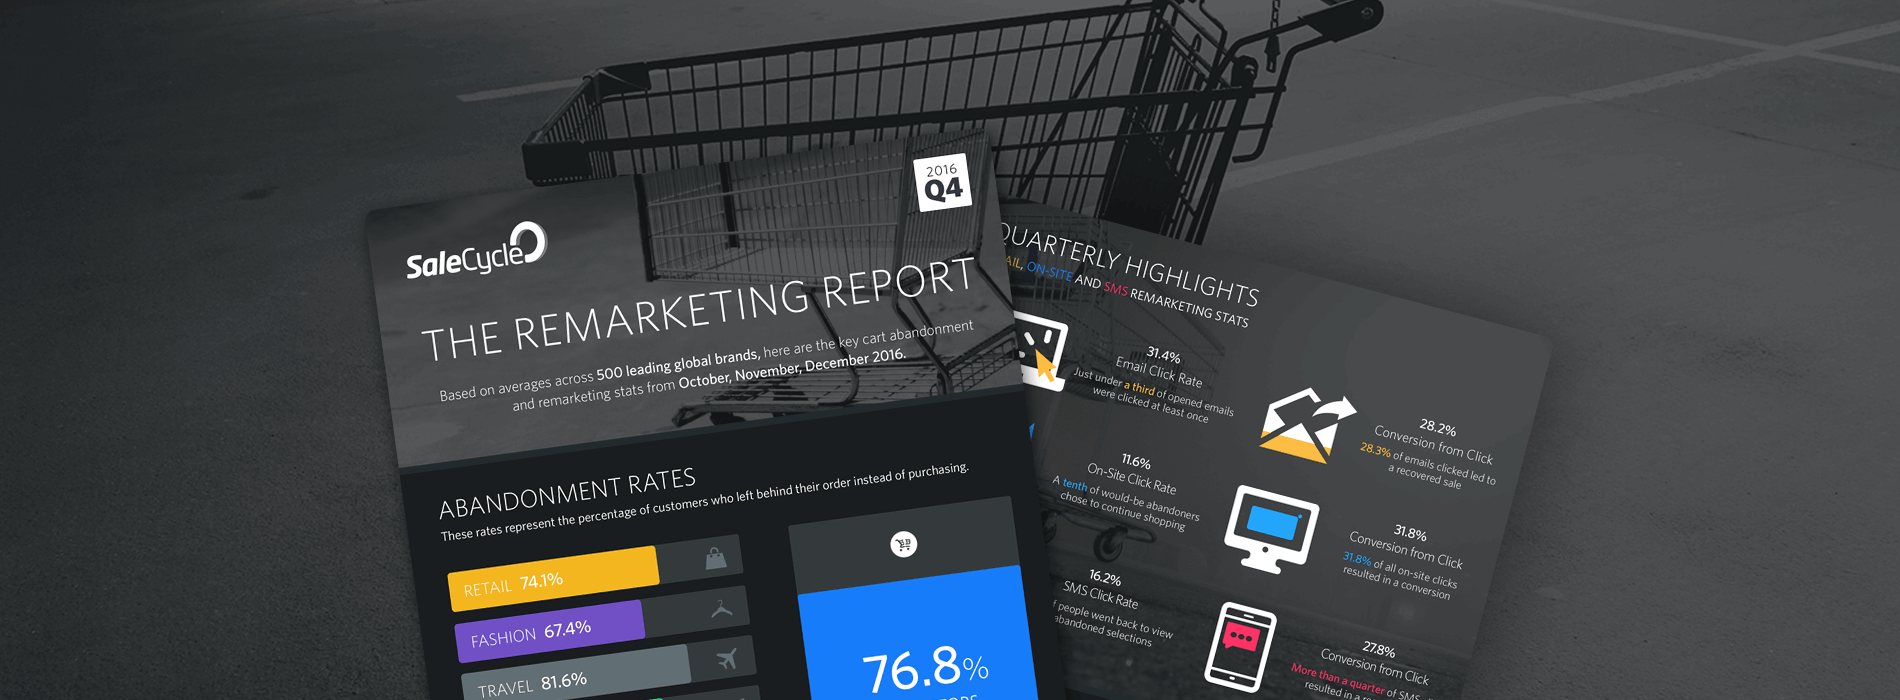 [Infographic] The Remarketing Report – Q4 2016